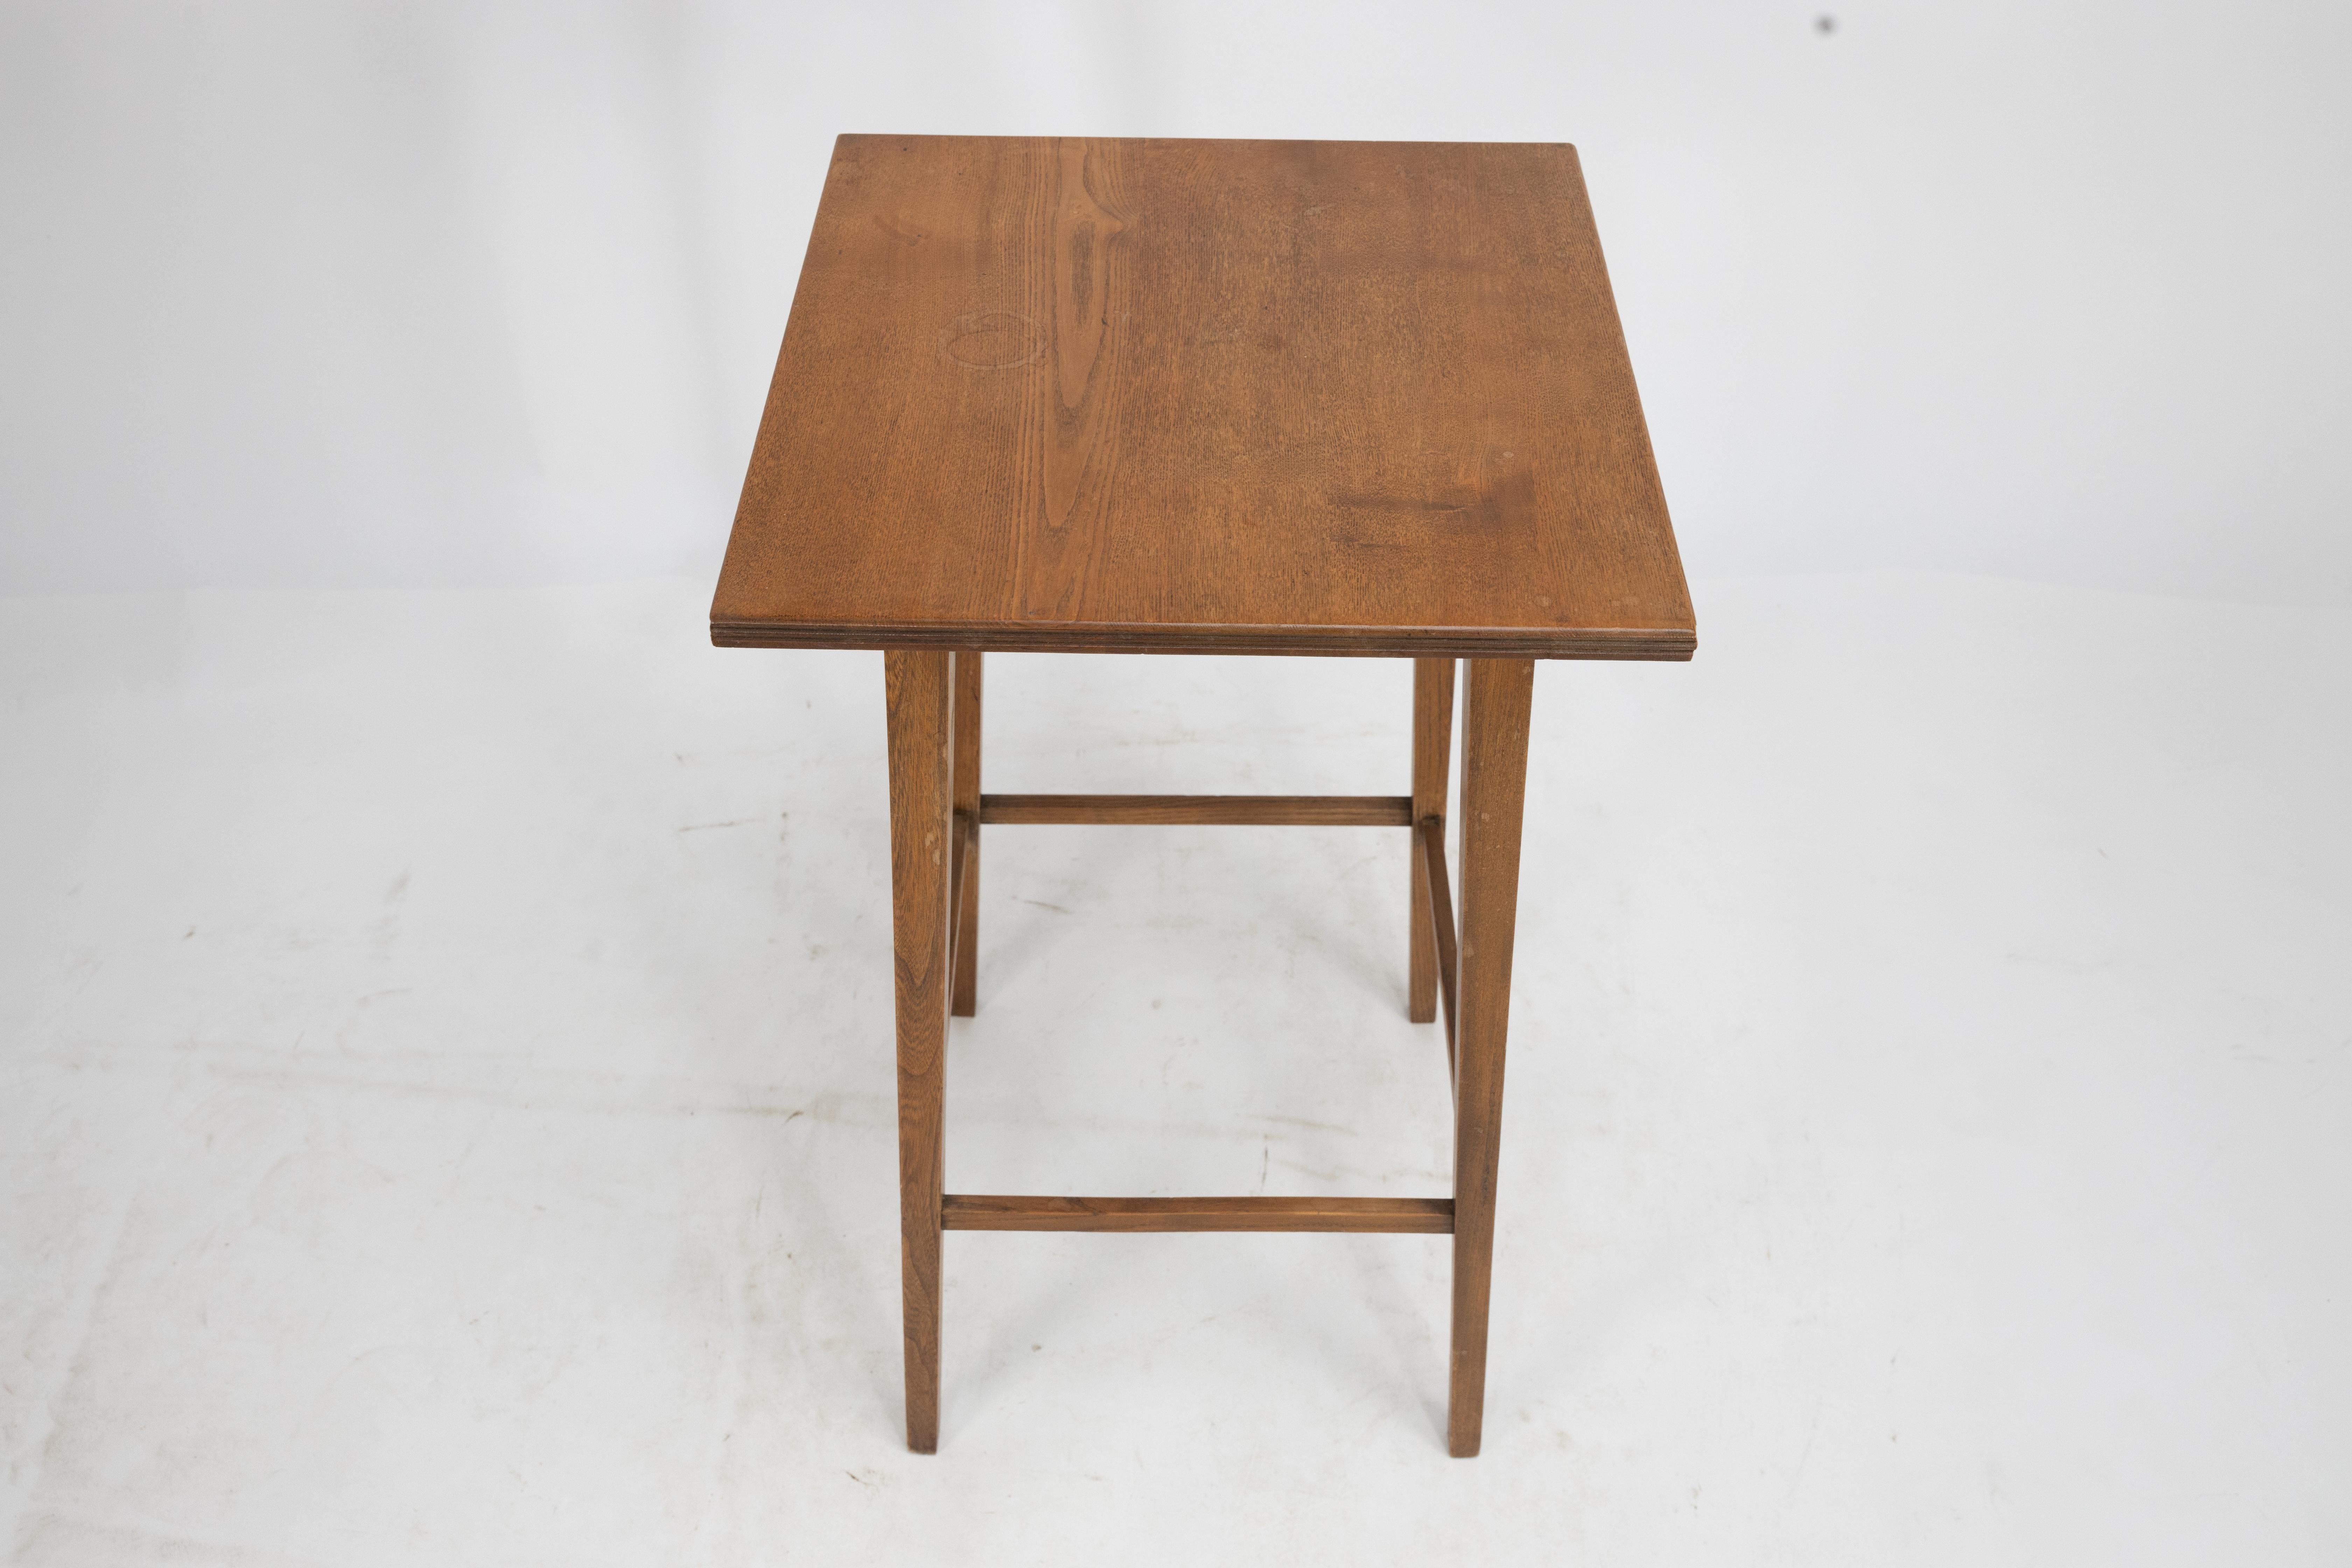 Shapland & Petter A small Arts & Crafts Ash side table with square tapering legs For Sale 2